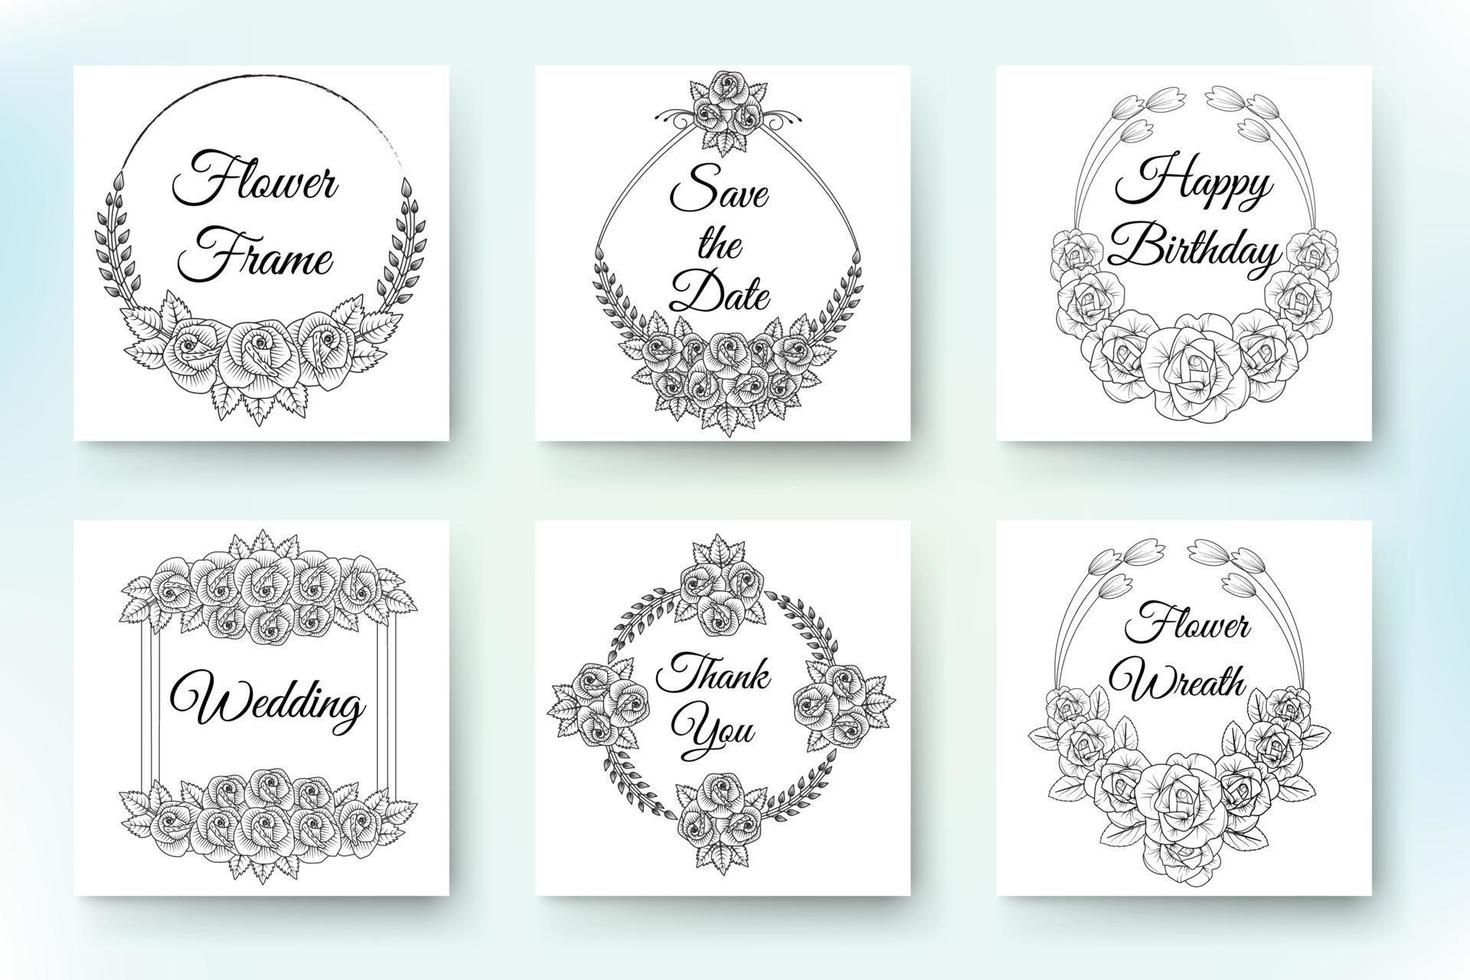 Design for invitation wedding or greeting cards of beautiful vector wreath and flowers set.